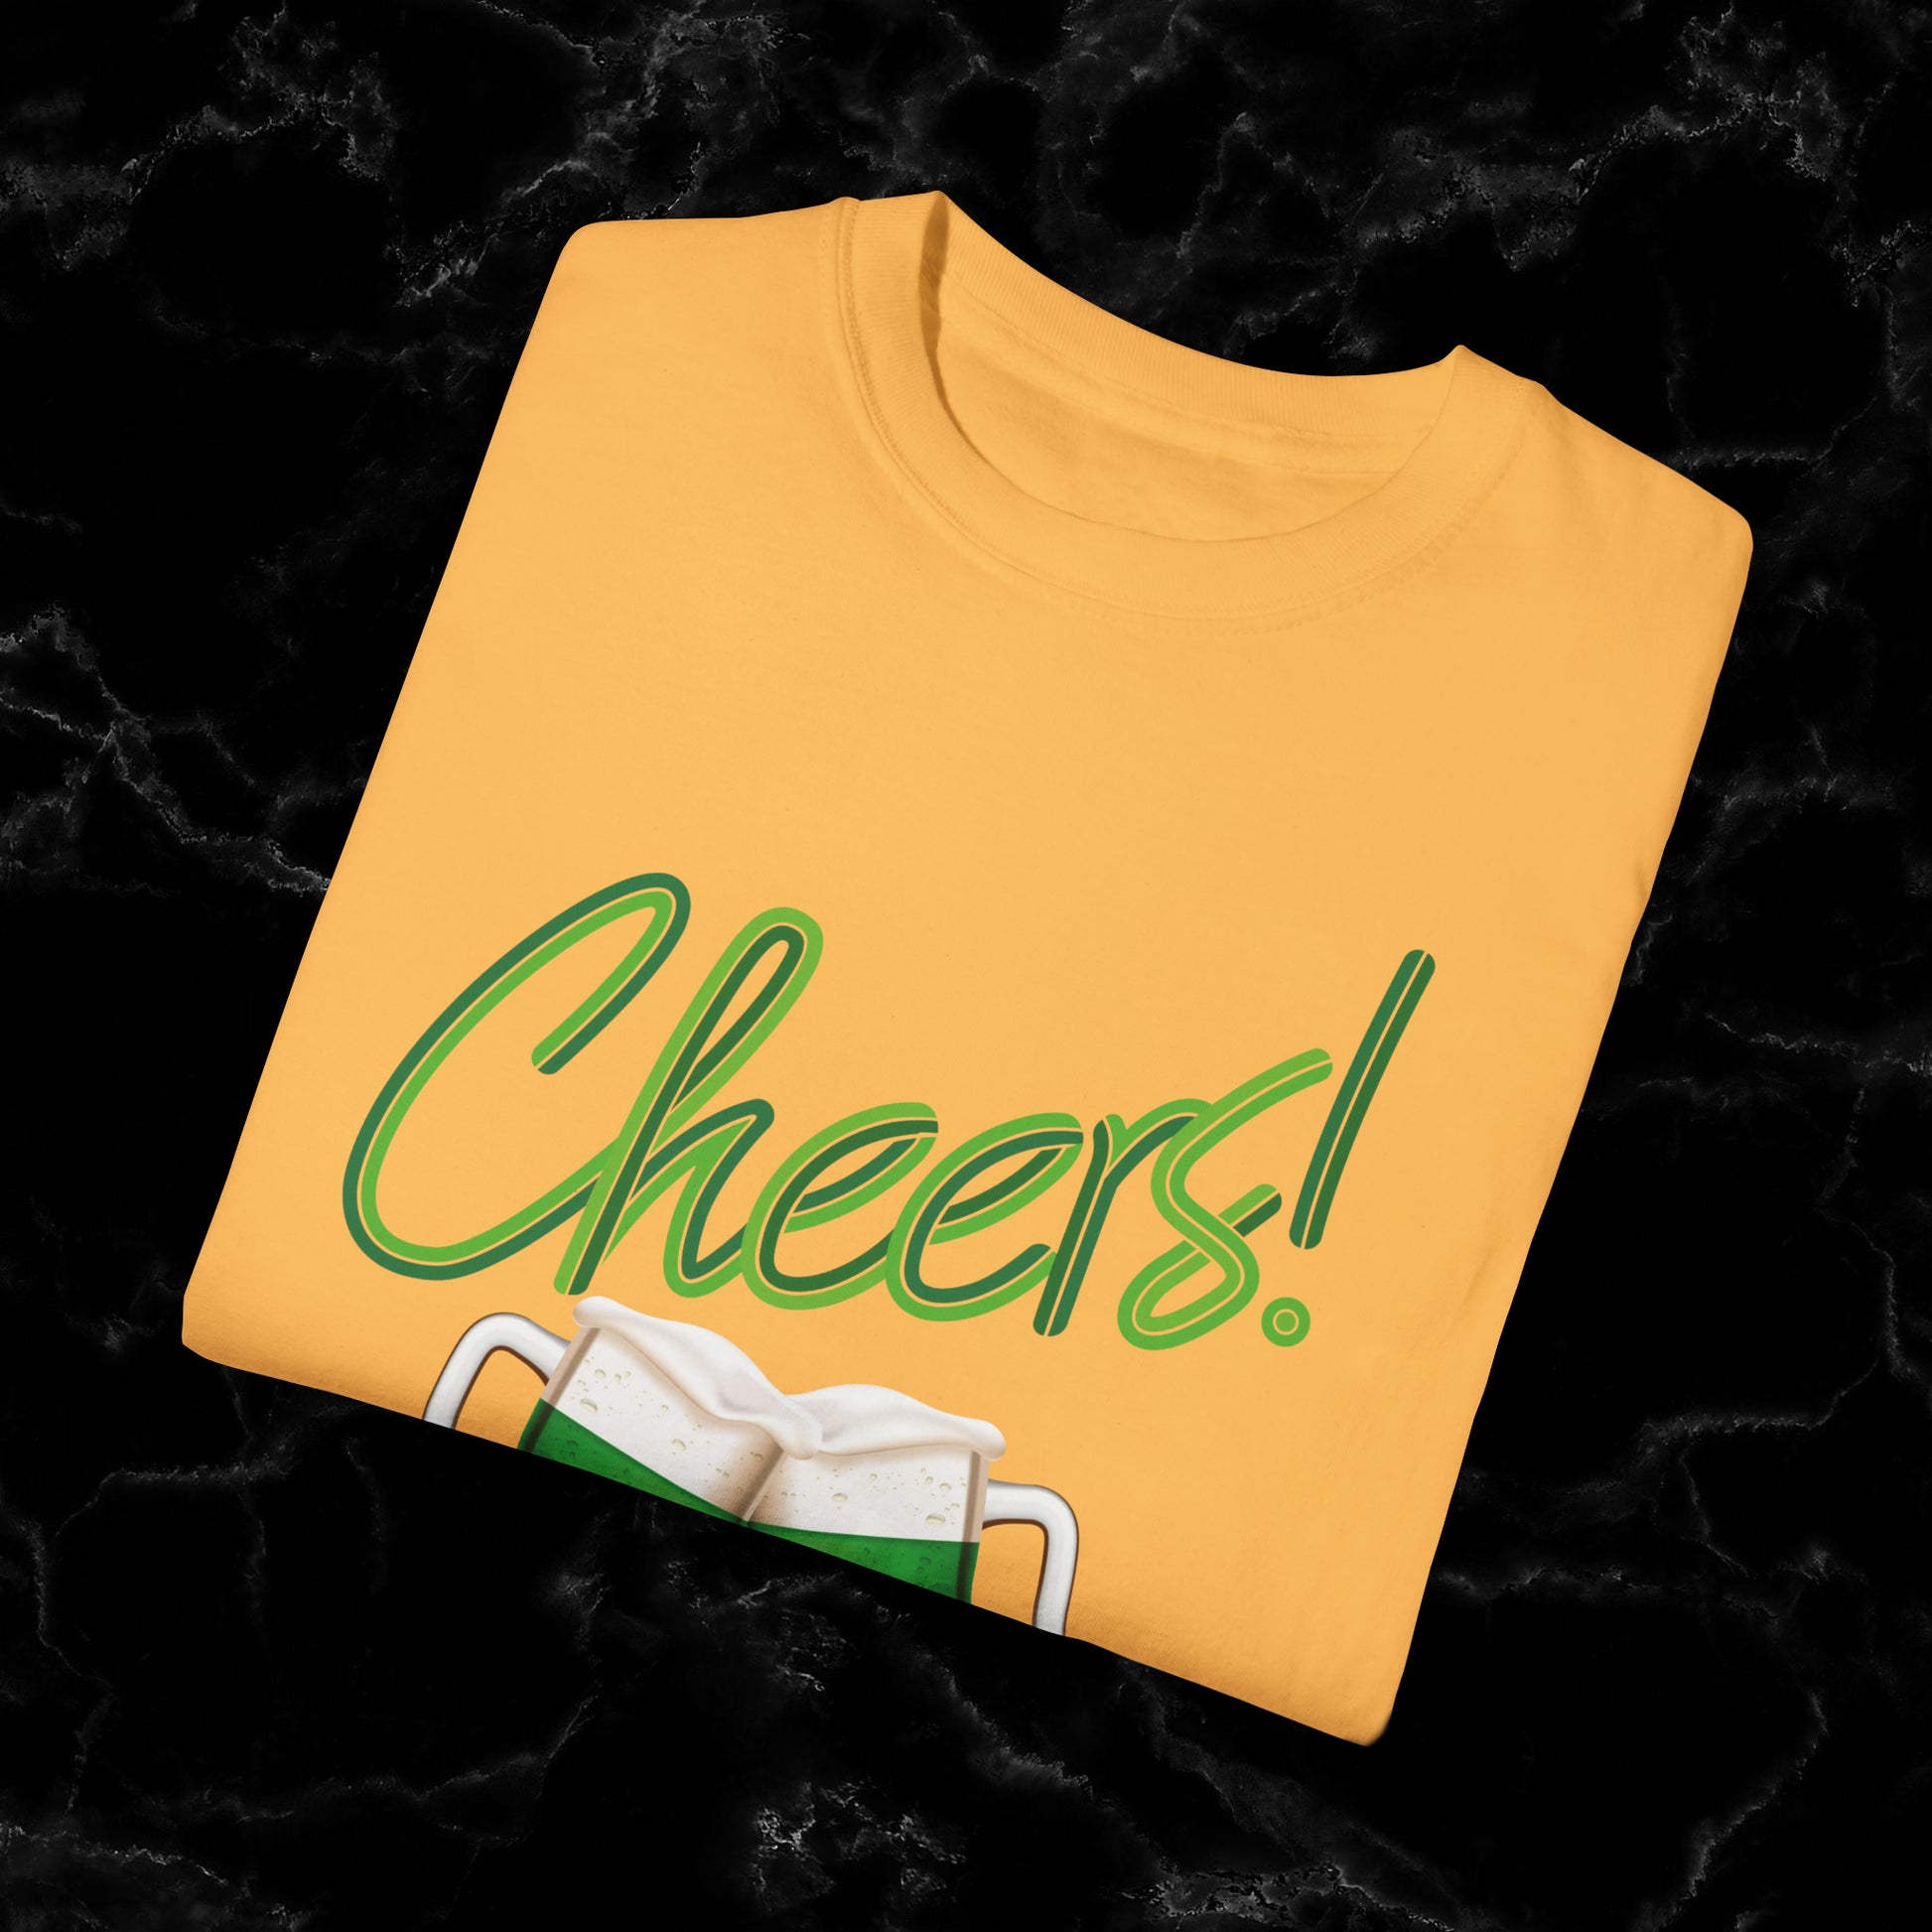 Cheers F**kers Shirt - A Bold Shamrock Statement for Irish Spirits and Good Times T-Shirt   